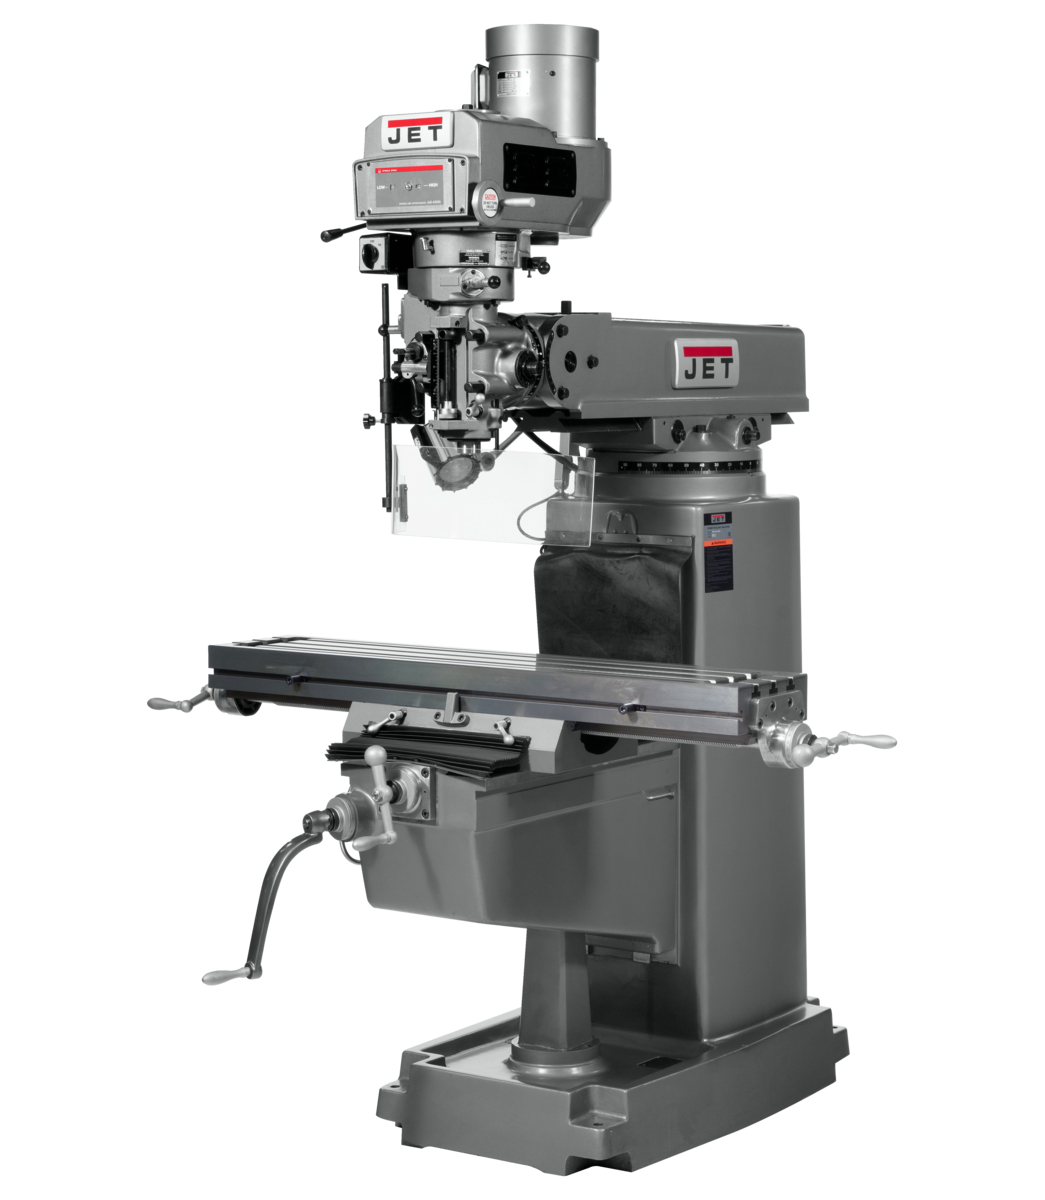 690160,The Jet JTM-1050 Mill With 3-Axis ACU-RITE 203 DRO (Quill) With X, Y and Z-Axis Powerfeeds in Metalworking, Milling, Vertical Mills